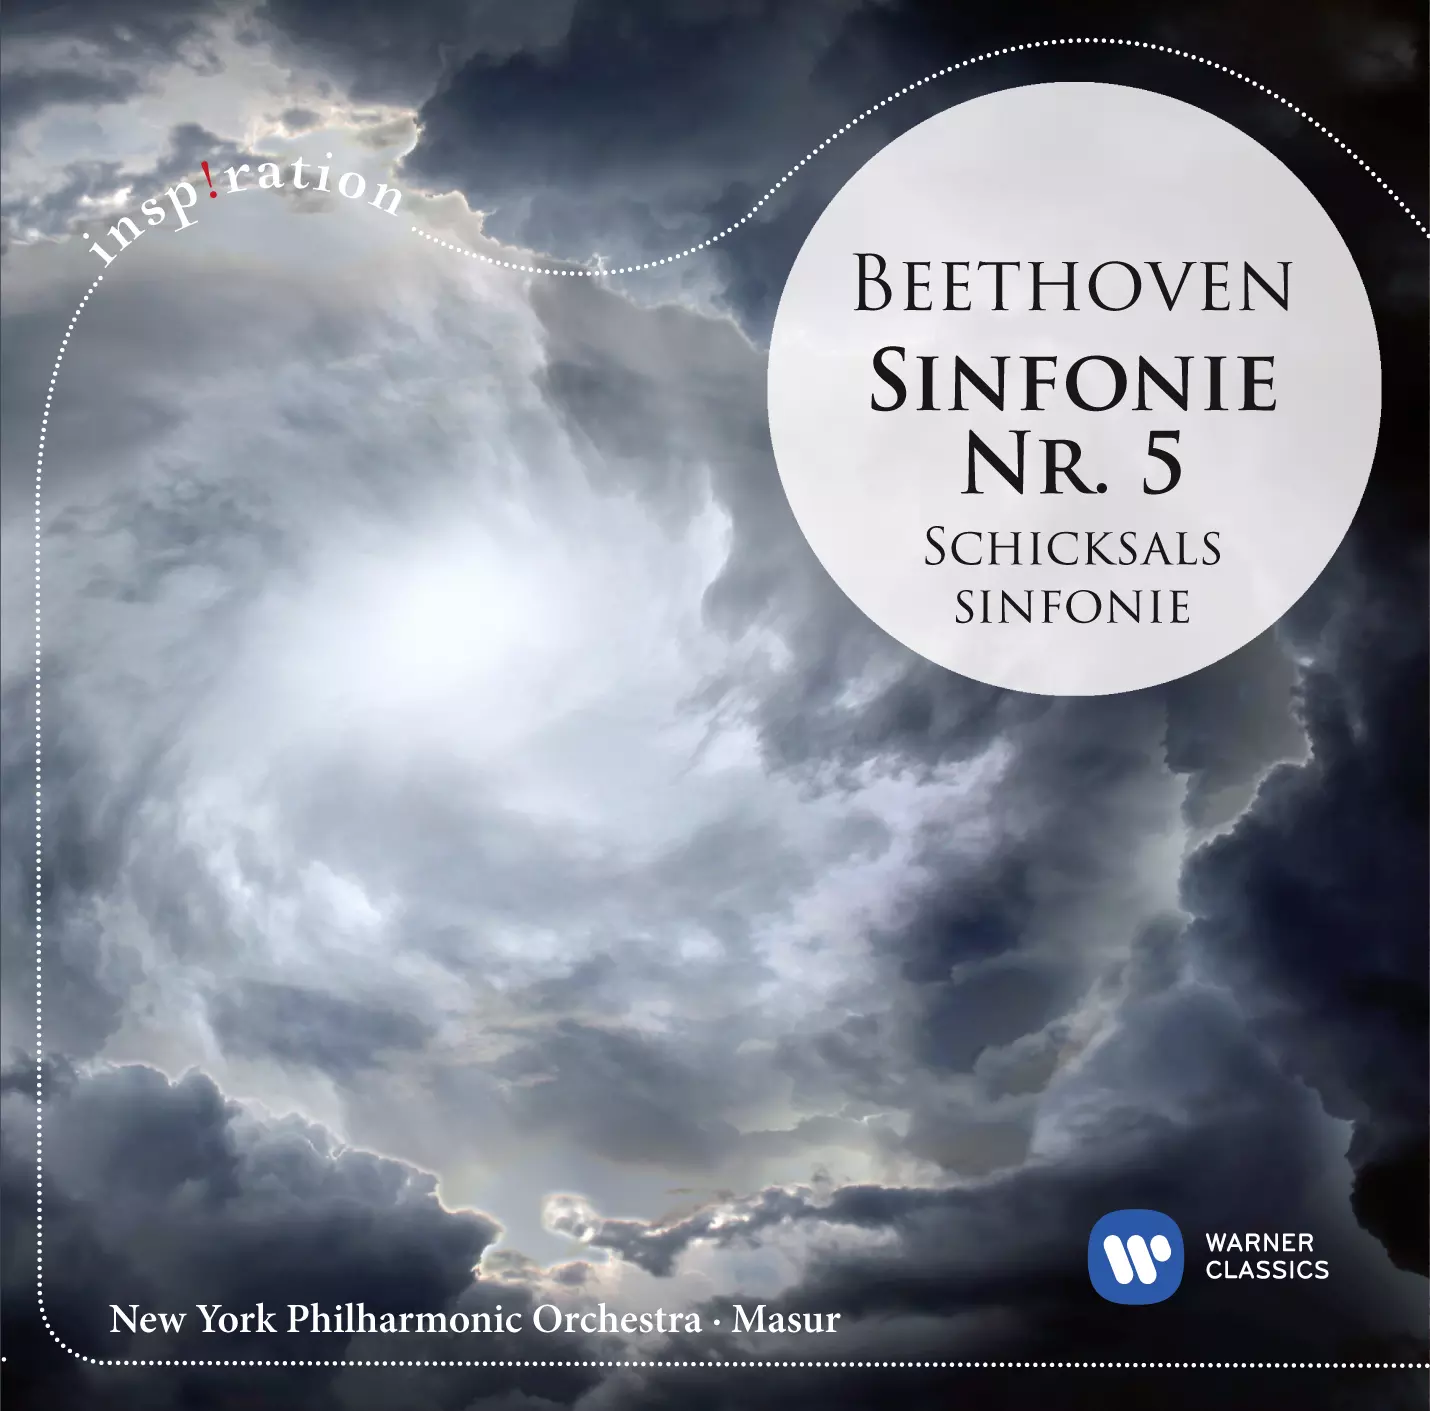 Beethoven: Symphony No. 5 - Fate Knocking at the Door